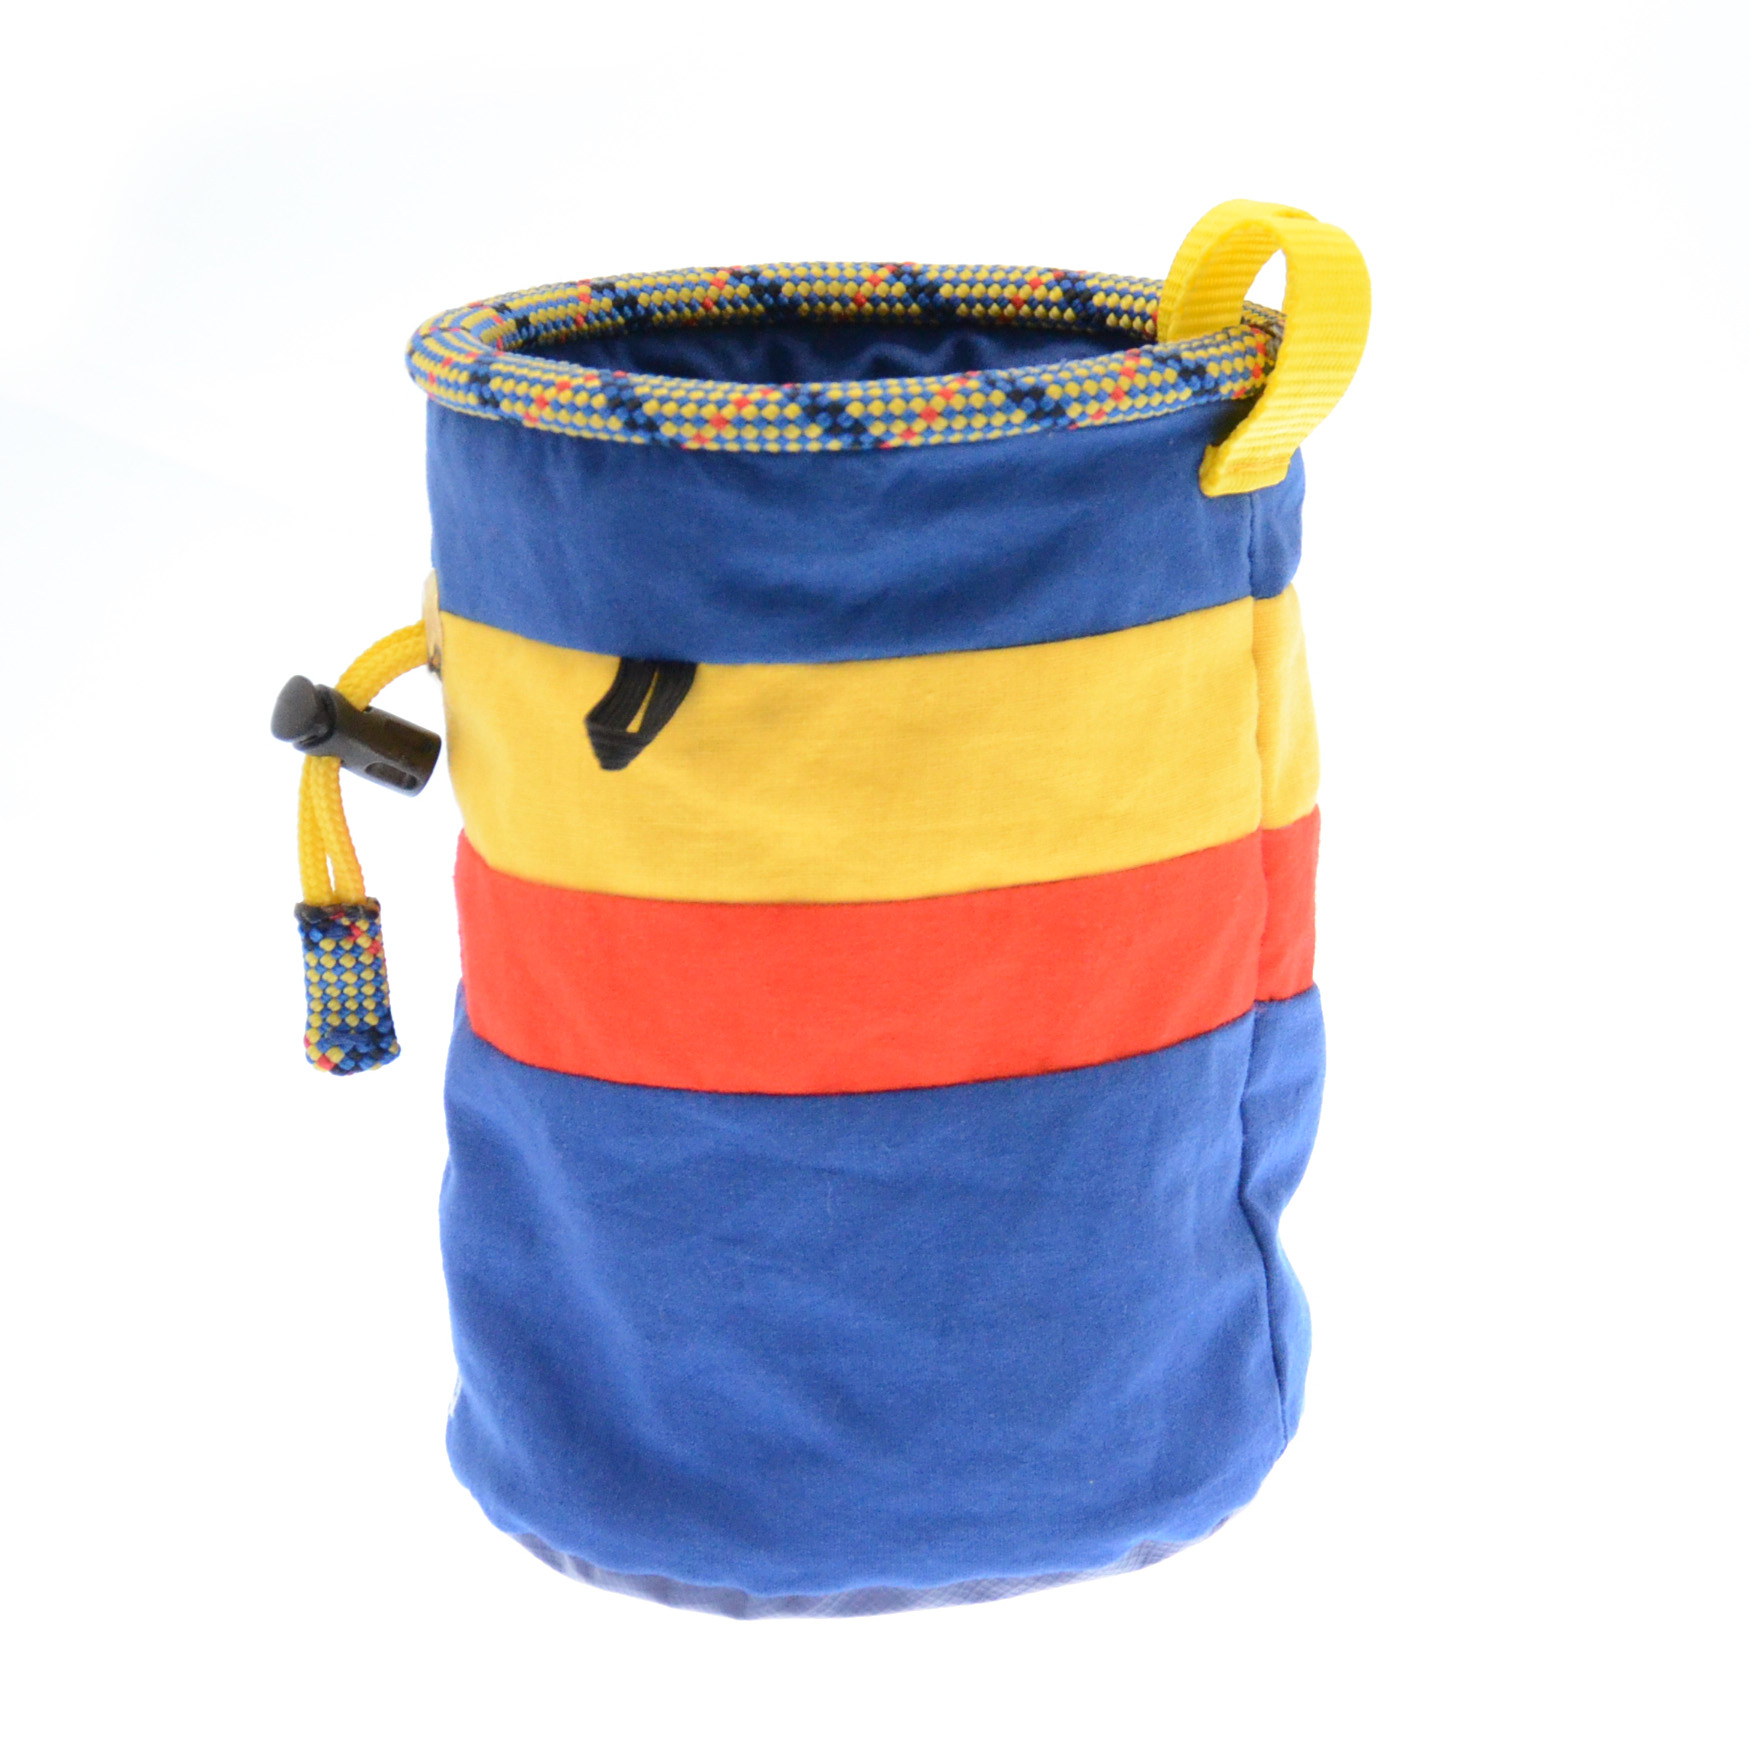 upcycled chalk bag made from old canvas tents and climbing rope - Crackpacs